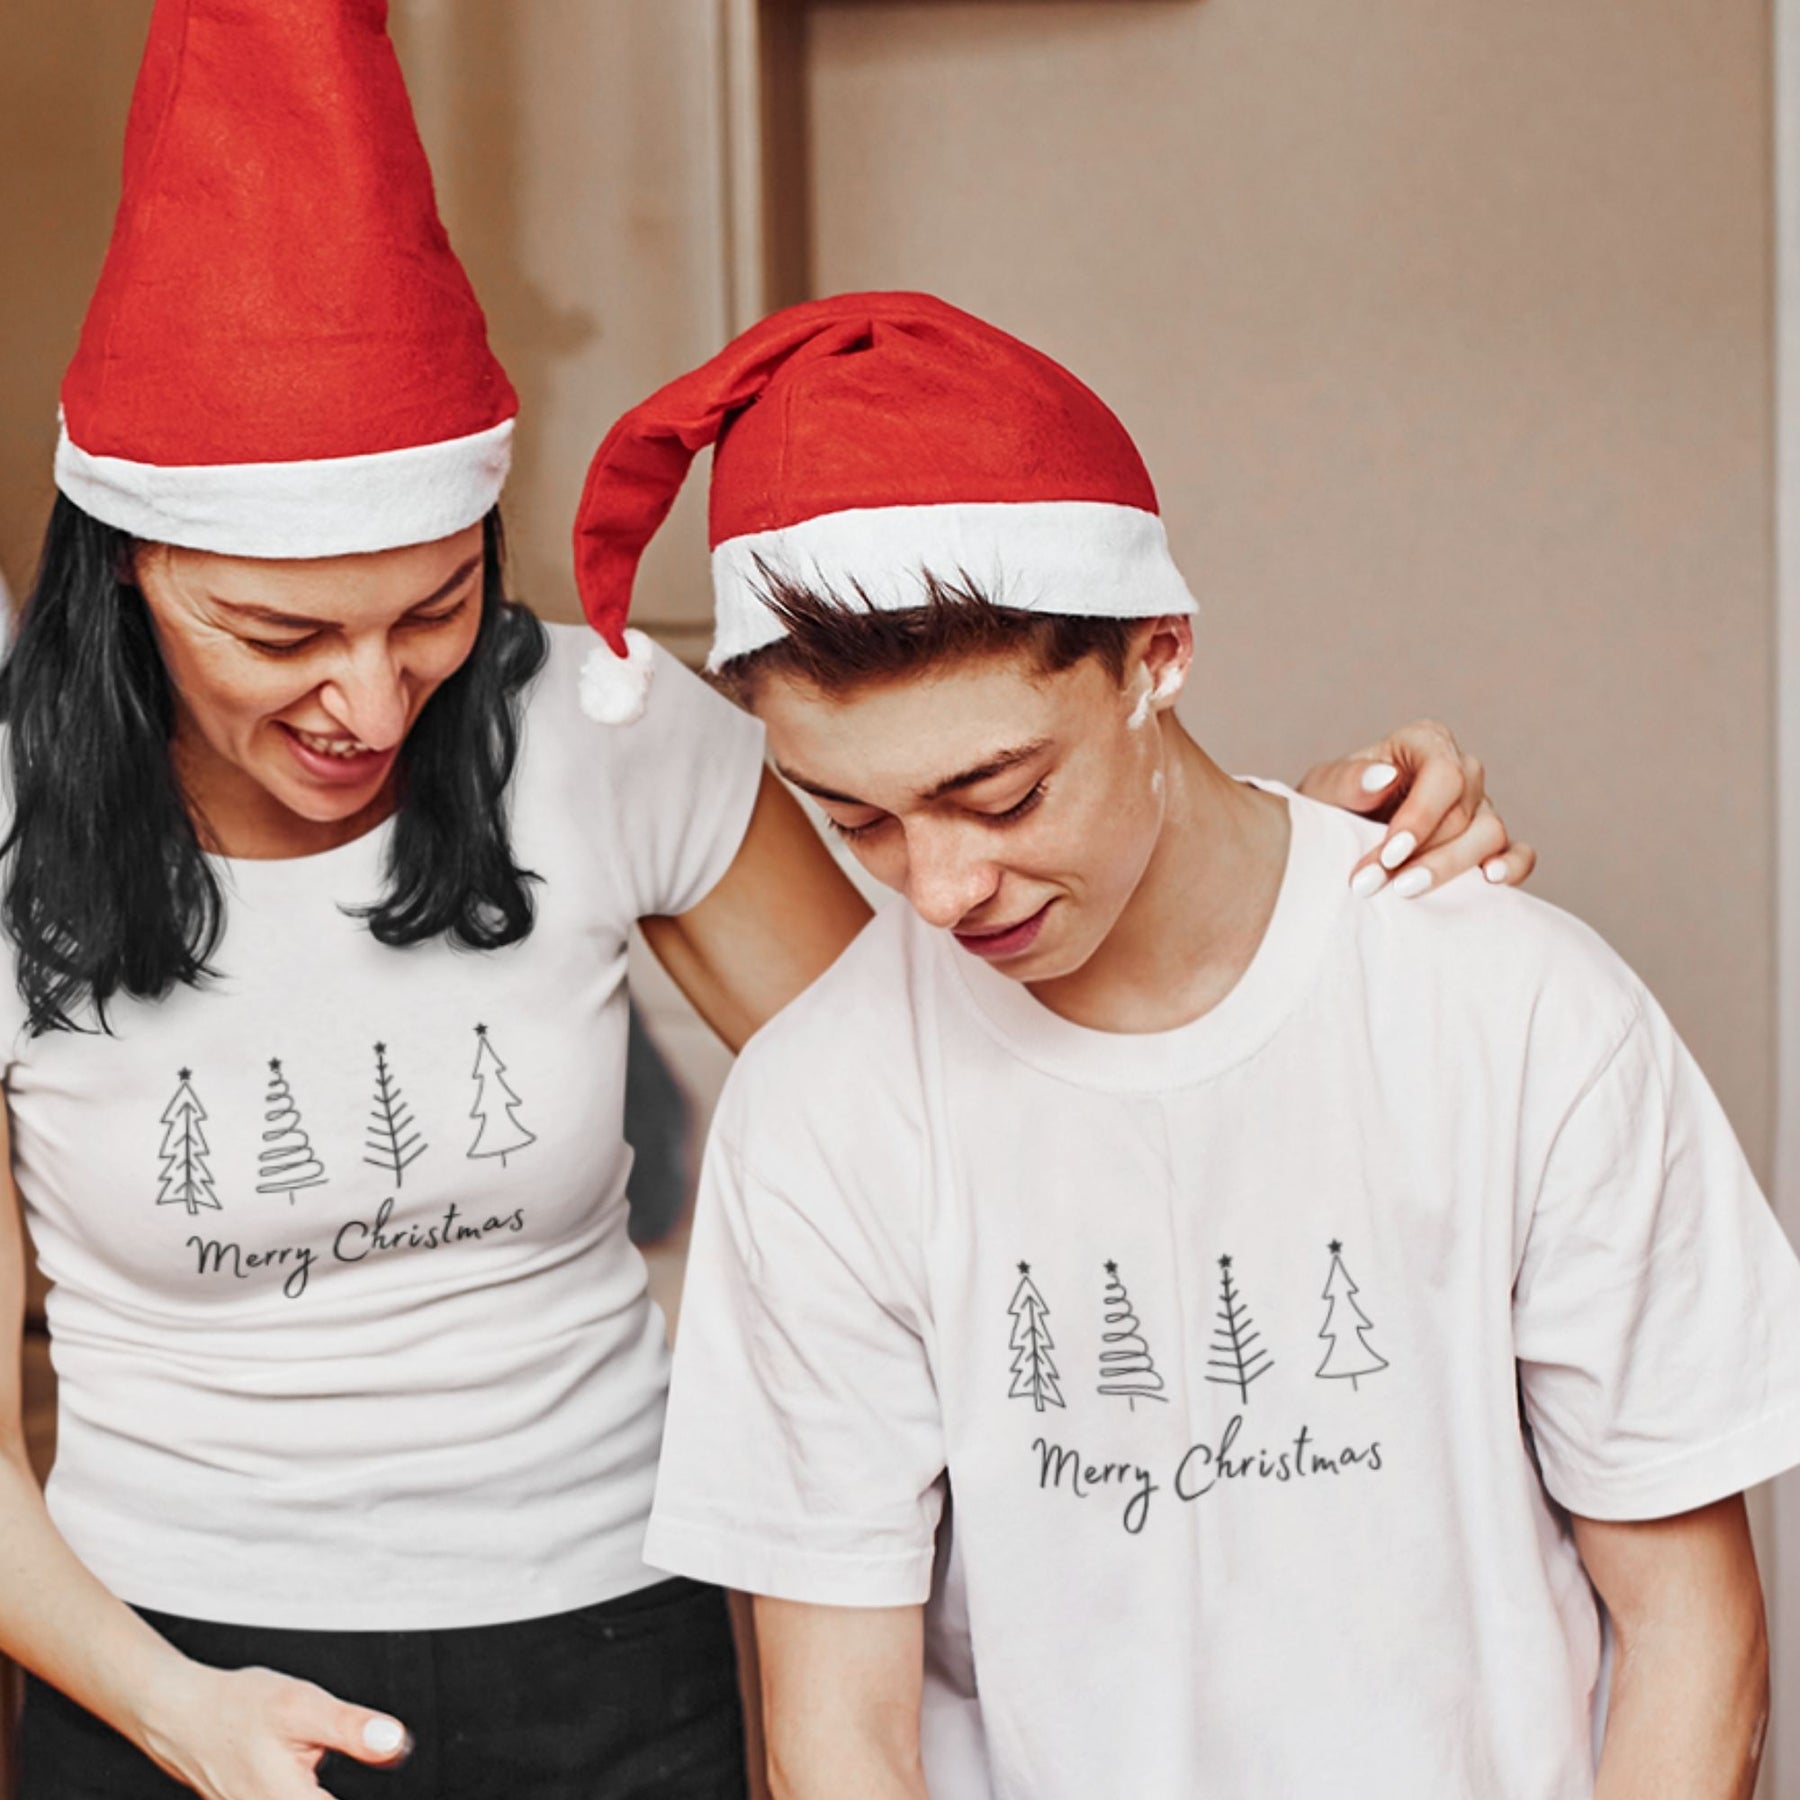 merry-christmas-matching-family-white-t-shirts-for-mom-dad-son-daughter-gogirgit-com